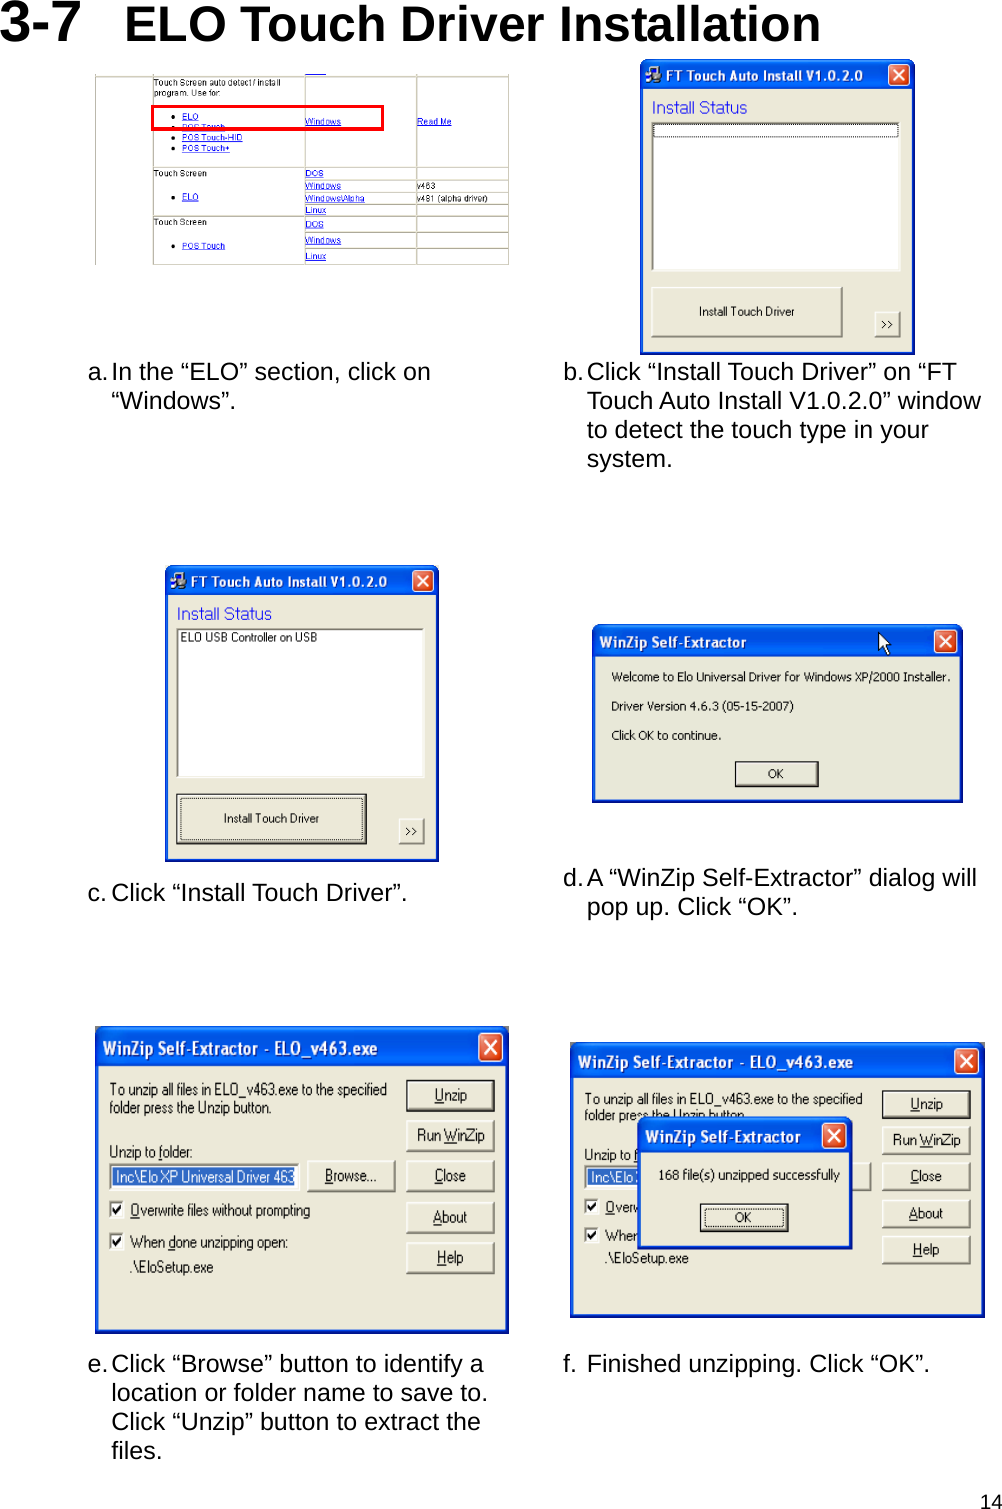  143-7  ELO Touch Driver Installation   a. In the “ELO” section, click on “Windows”.  b. Click “Install Touch Driver” on “FT Touch Auto Install V1.0.2.0” window to detect the touch type in your system.      c. Click “Install Touch Driver”.  d. A “WinZip Self-Extractor” dialog will pop up. Click “OK”.    e. Click “Browse” button to identify a location or folder name to save to. Click “Unzip” button to extract the files. f. Finished unzipping. Click “OK”. 